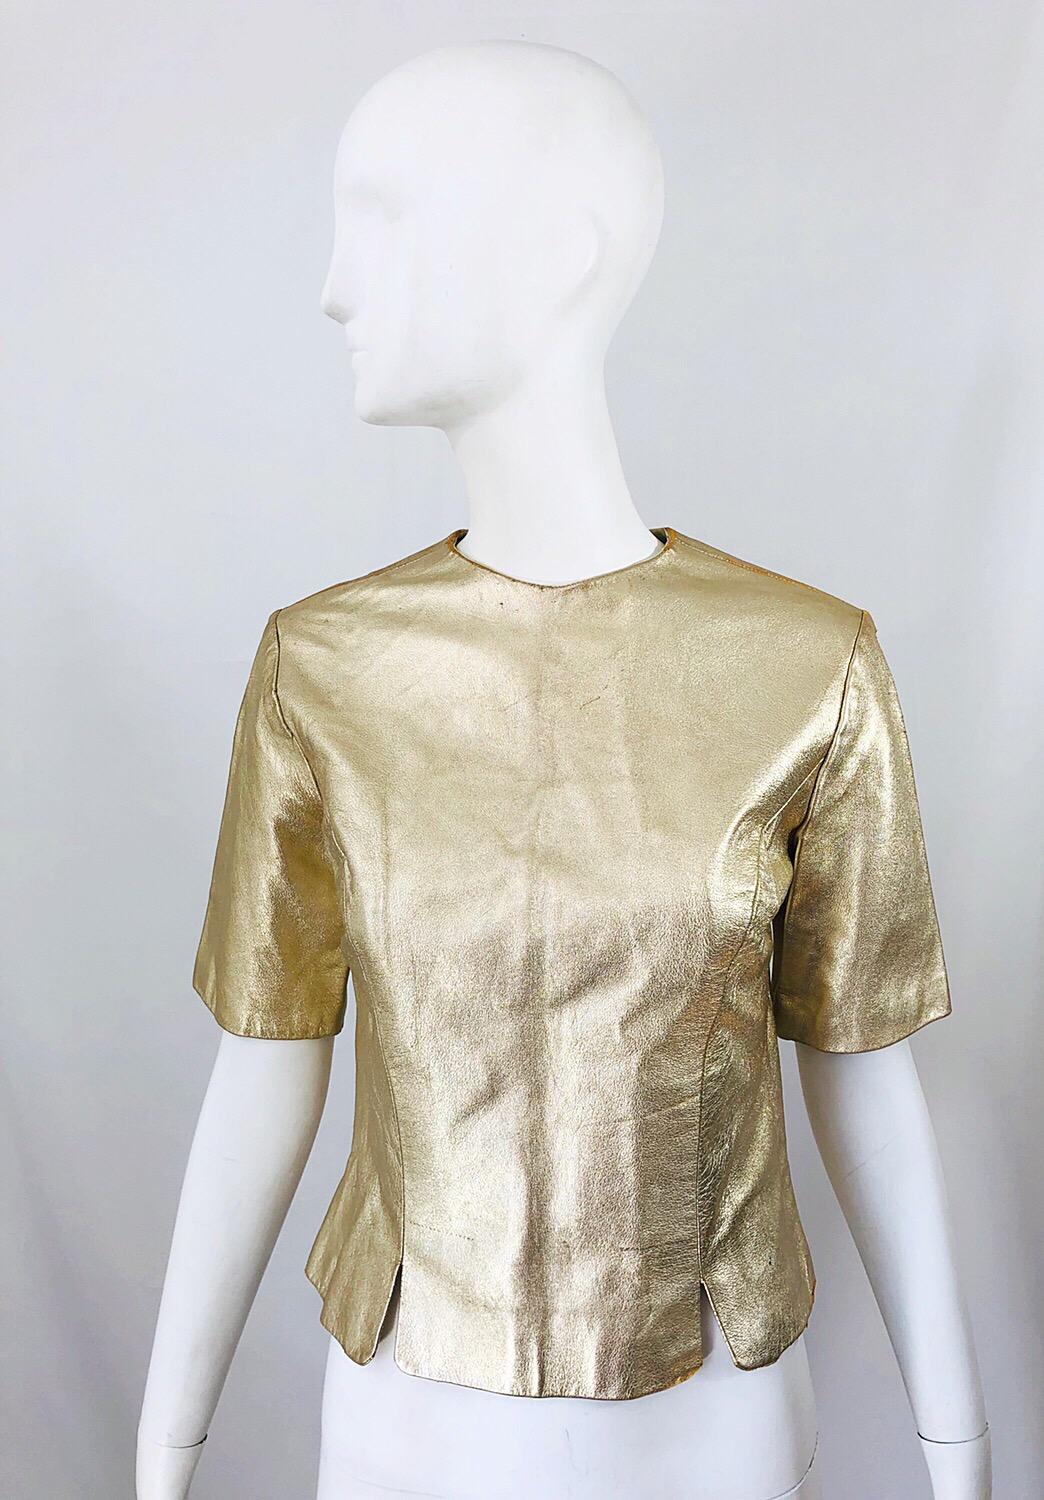 Fabulous 1980s does 1950s gold leather distressed shirt! Features slightly distressed gold leather. Great tailored fit with gold leather buttons up the back. Fully lined in silk. Can easily be dressed up or down. Great belted or alone with jeans,